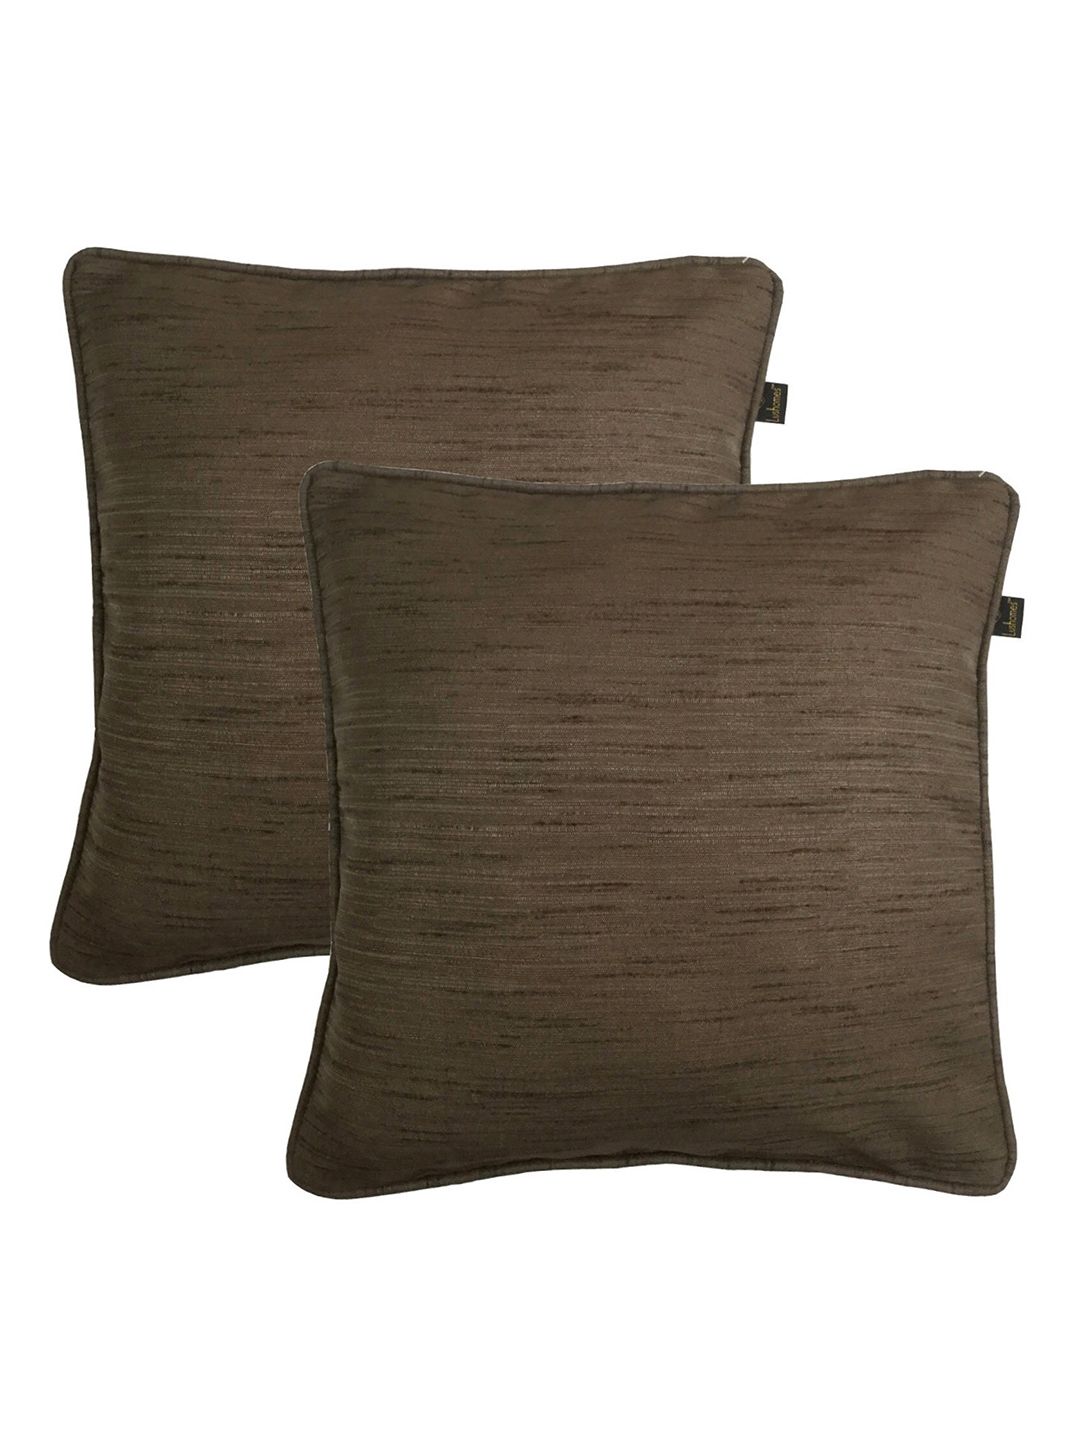 Lushomes Brown Set of 2 Square Cushion Covers Price in India